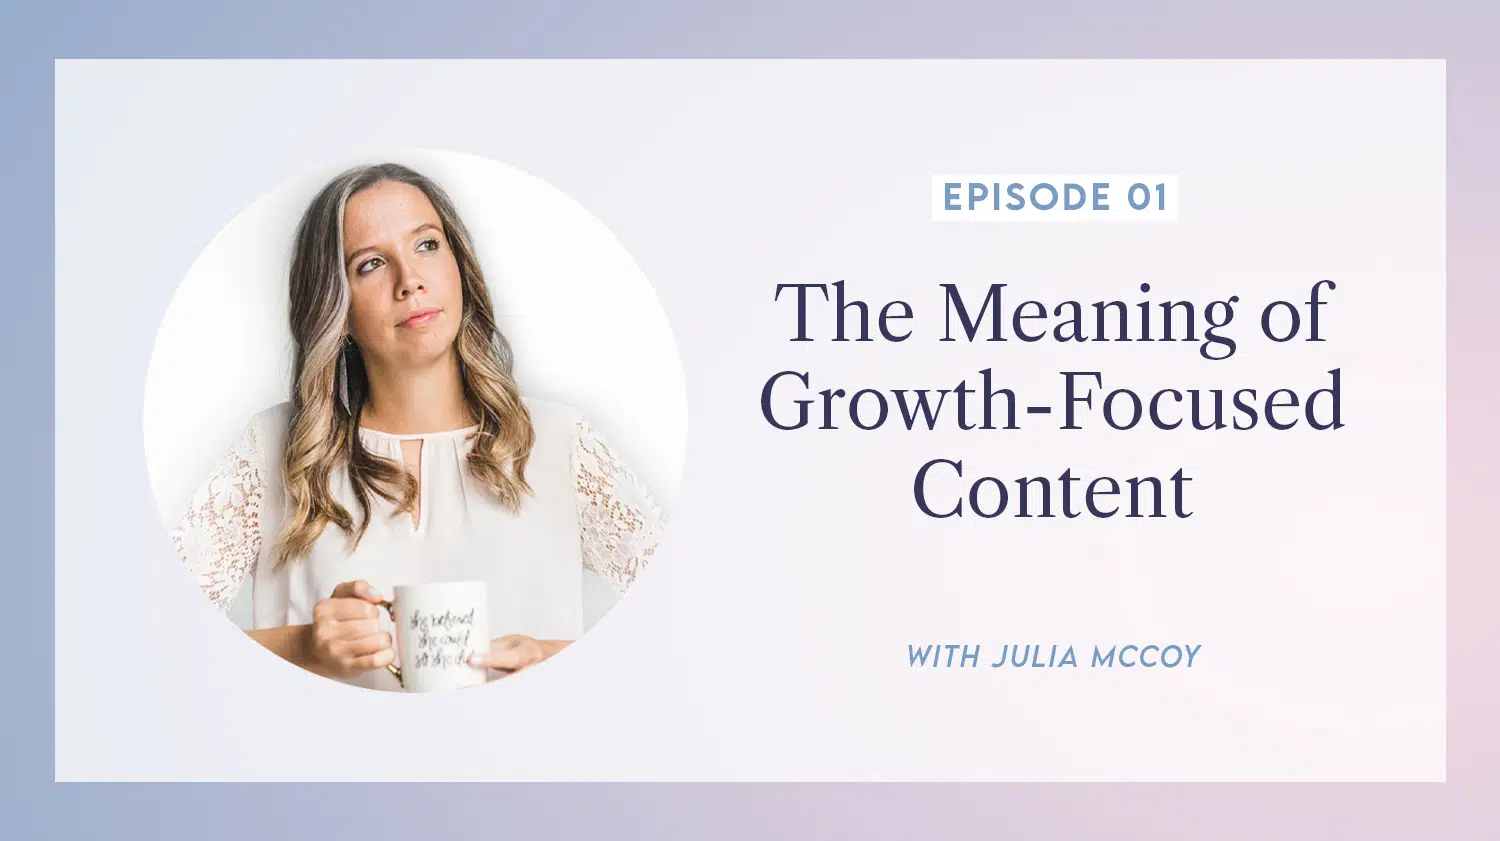 content transformation podcast with julia mccoy episode 1 meaning of growth-focused content